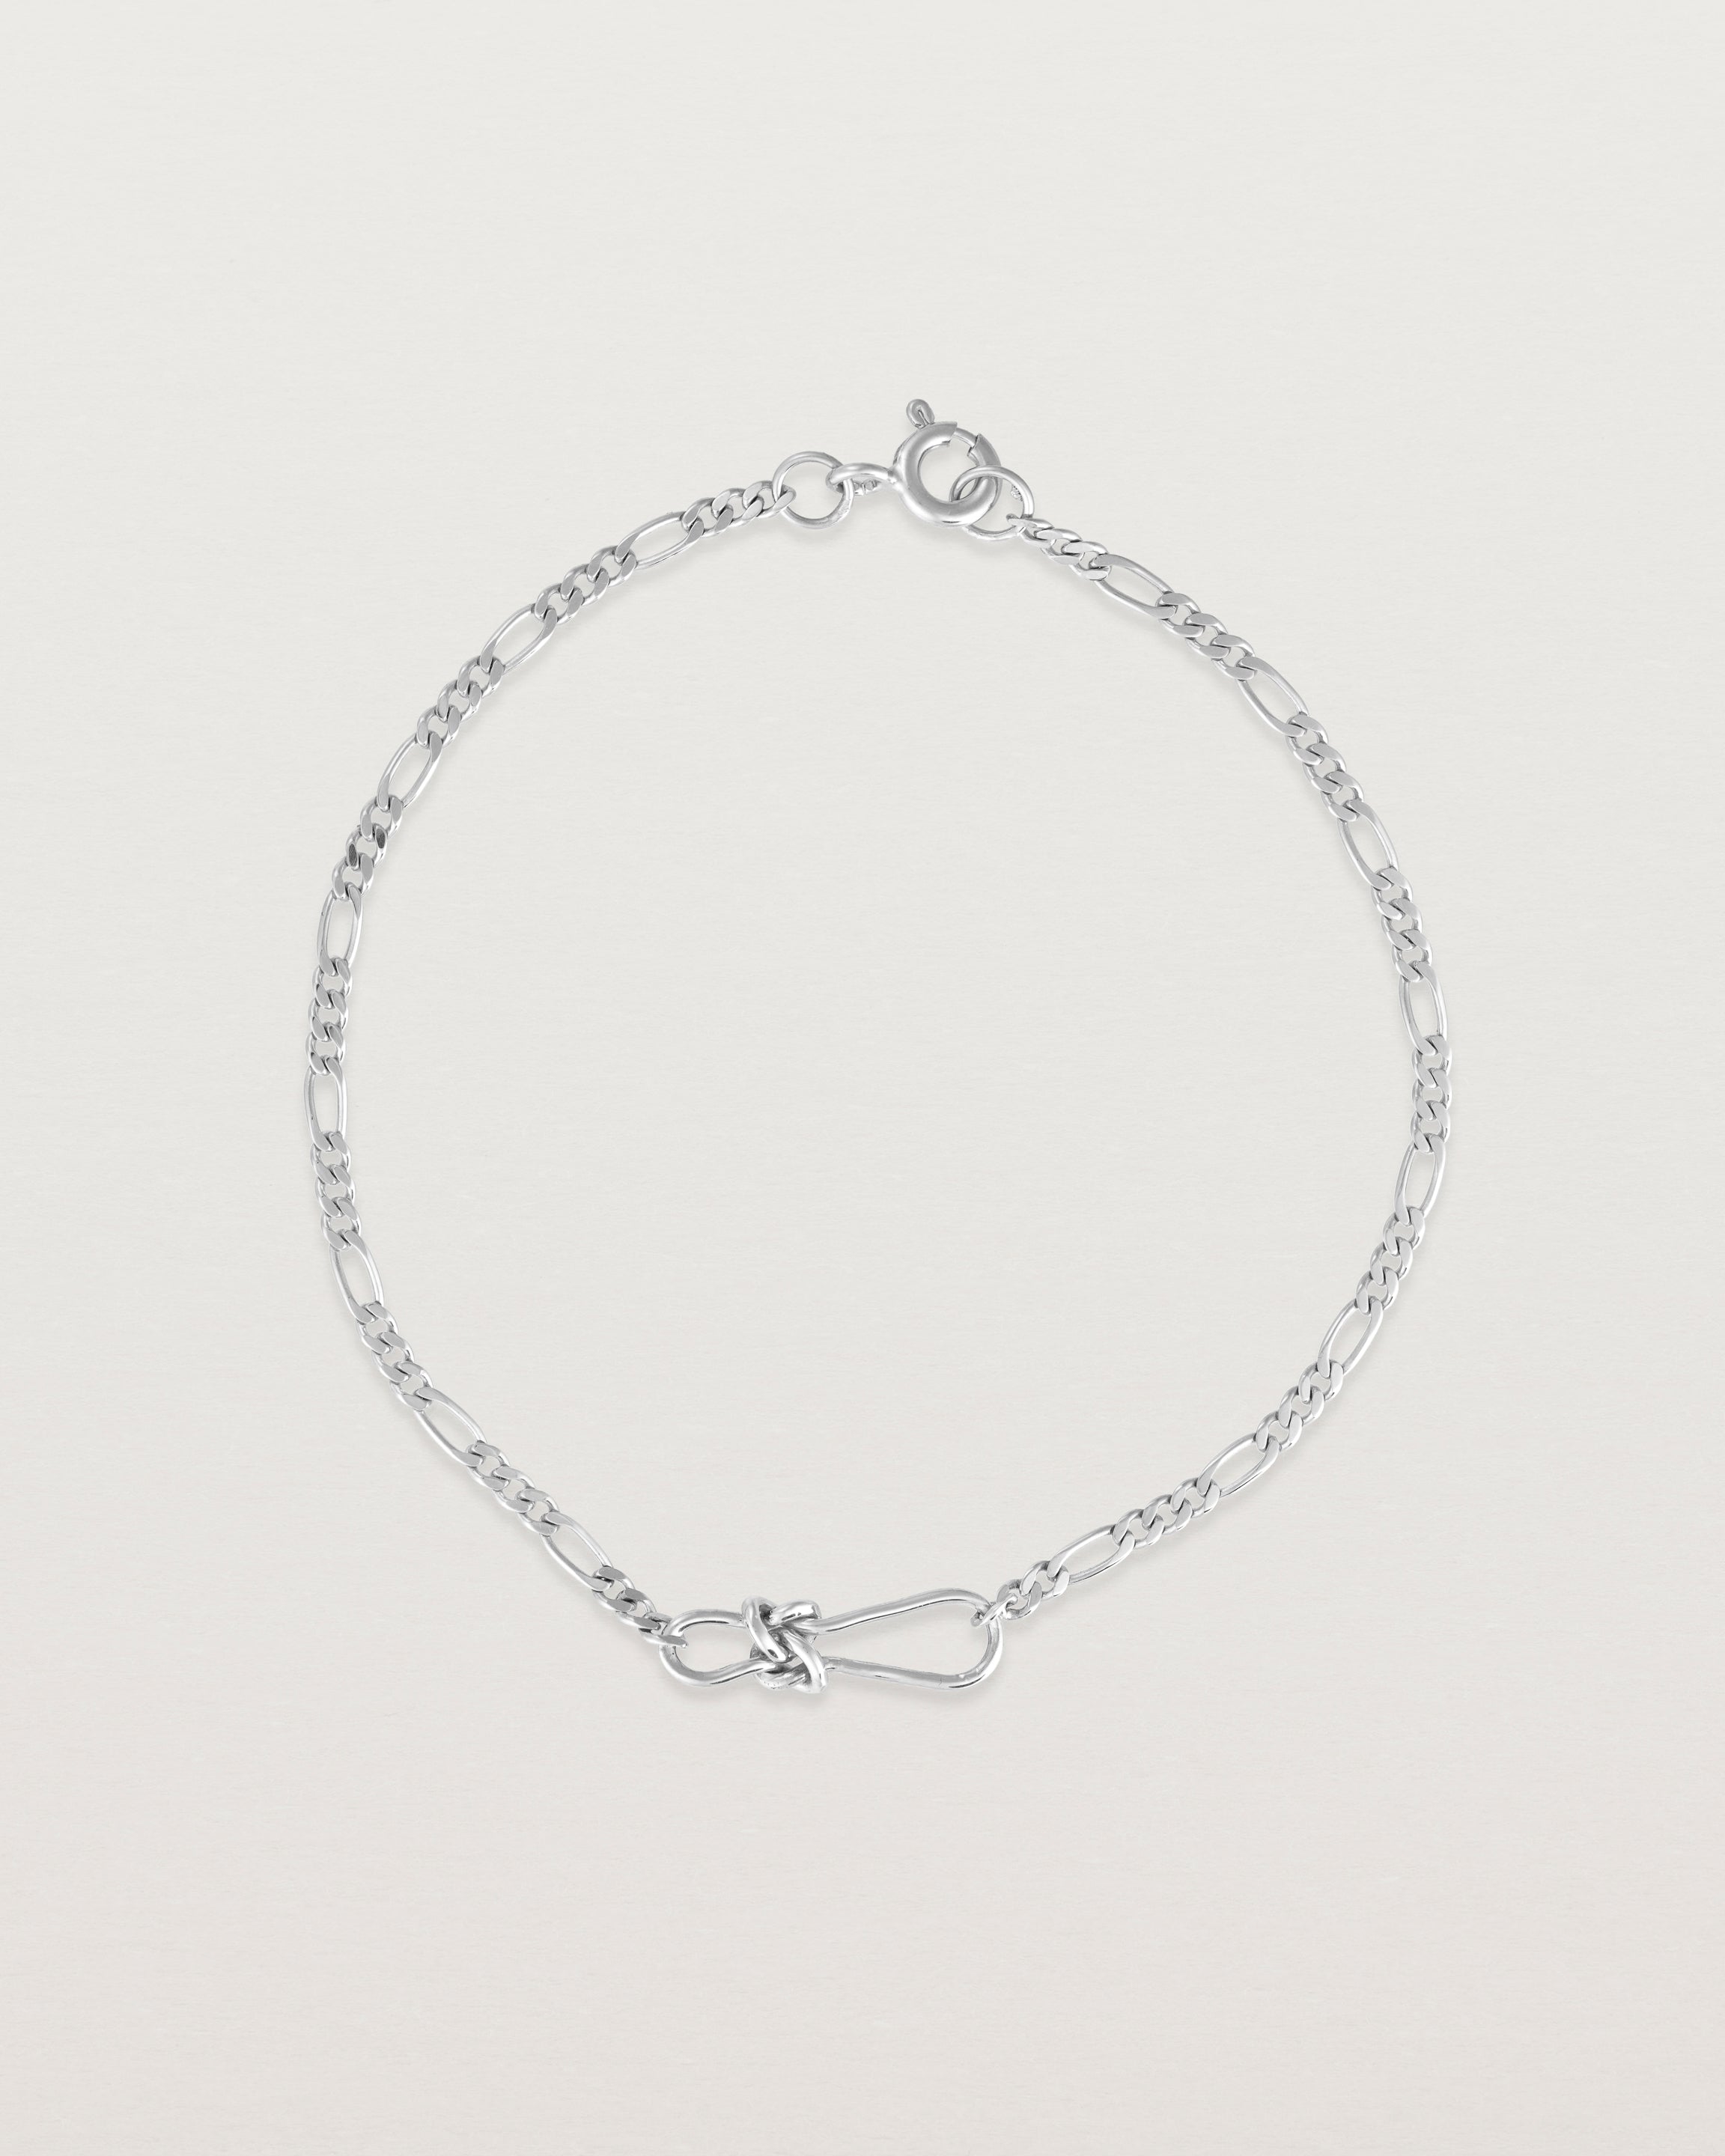 Top view of the Anam Bracelet in sterling silver.